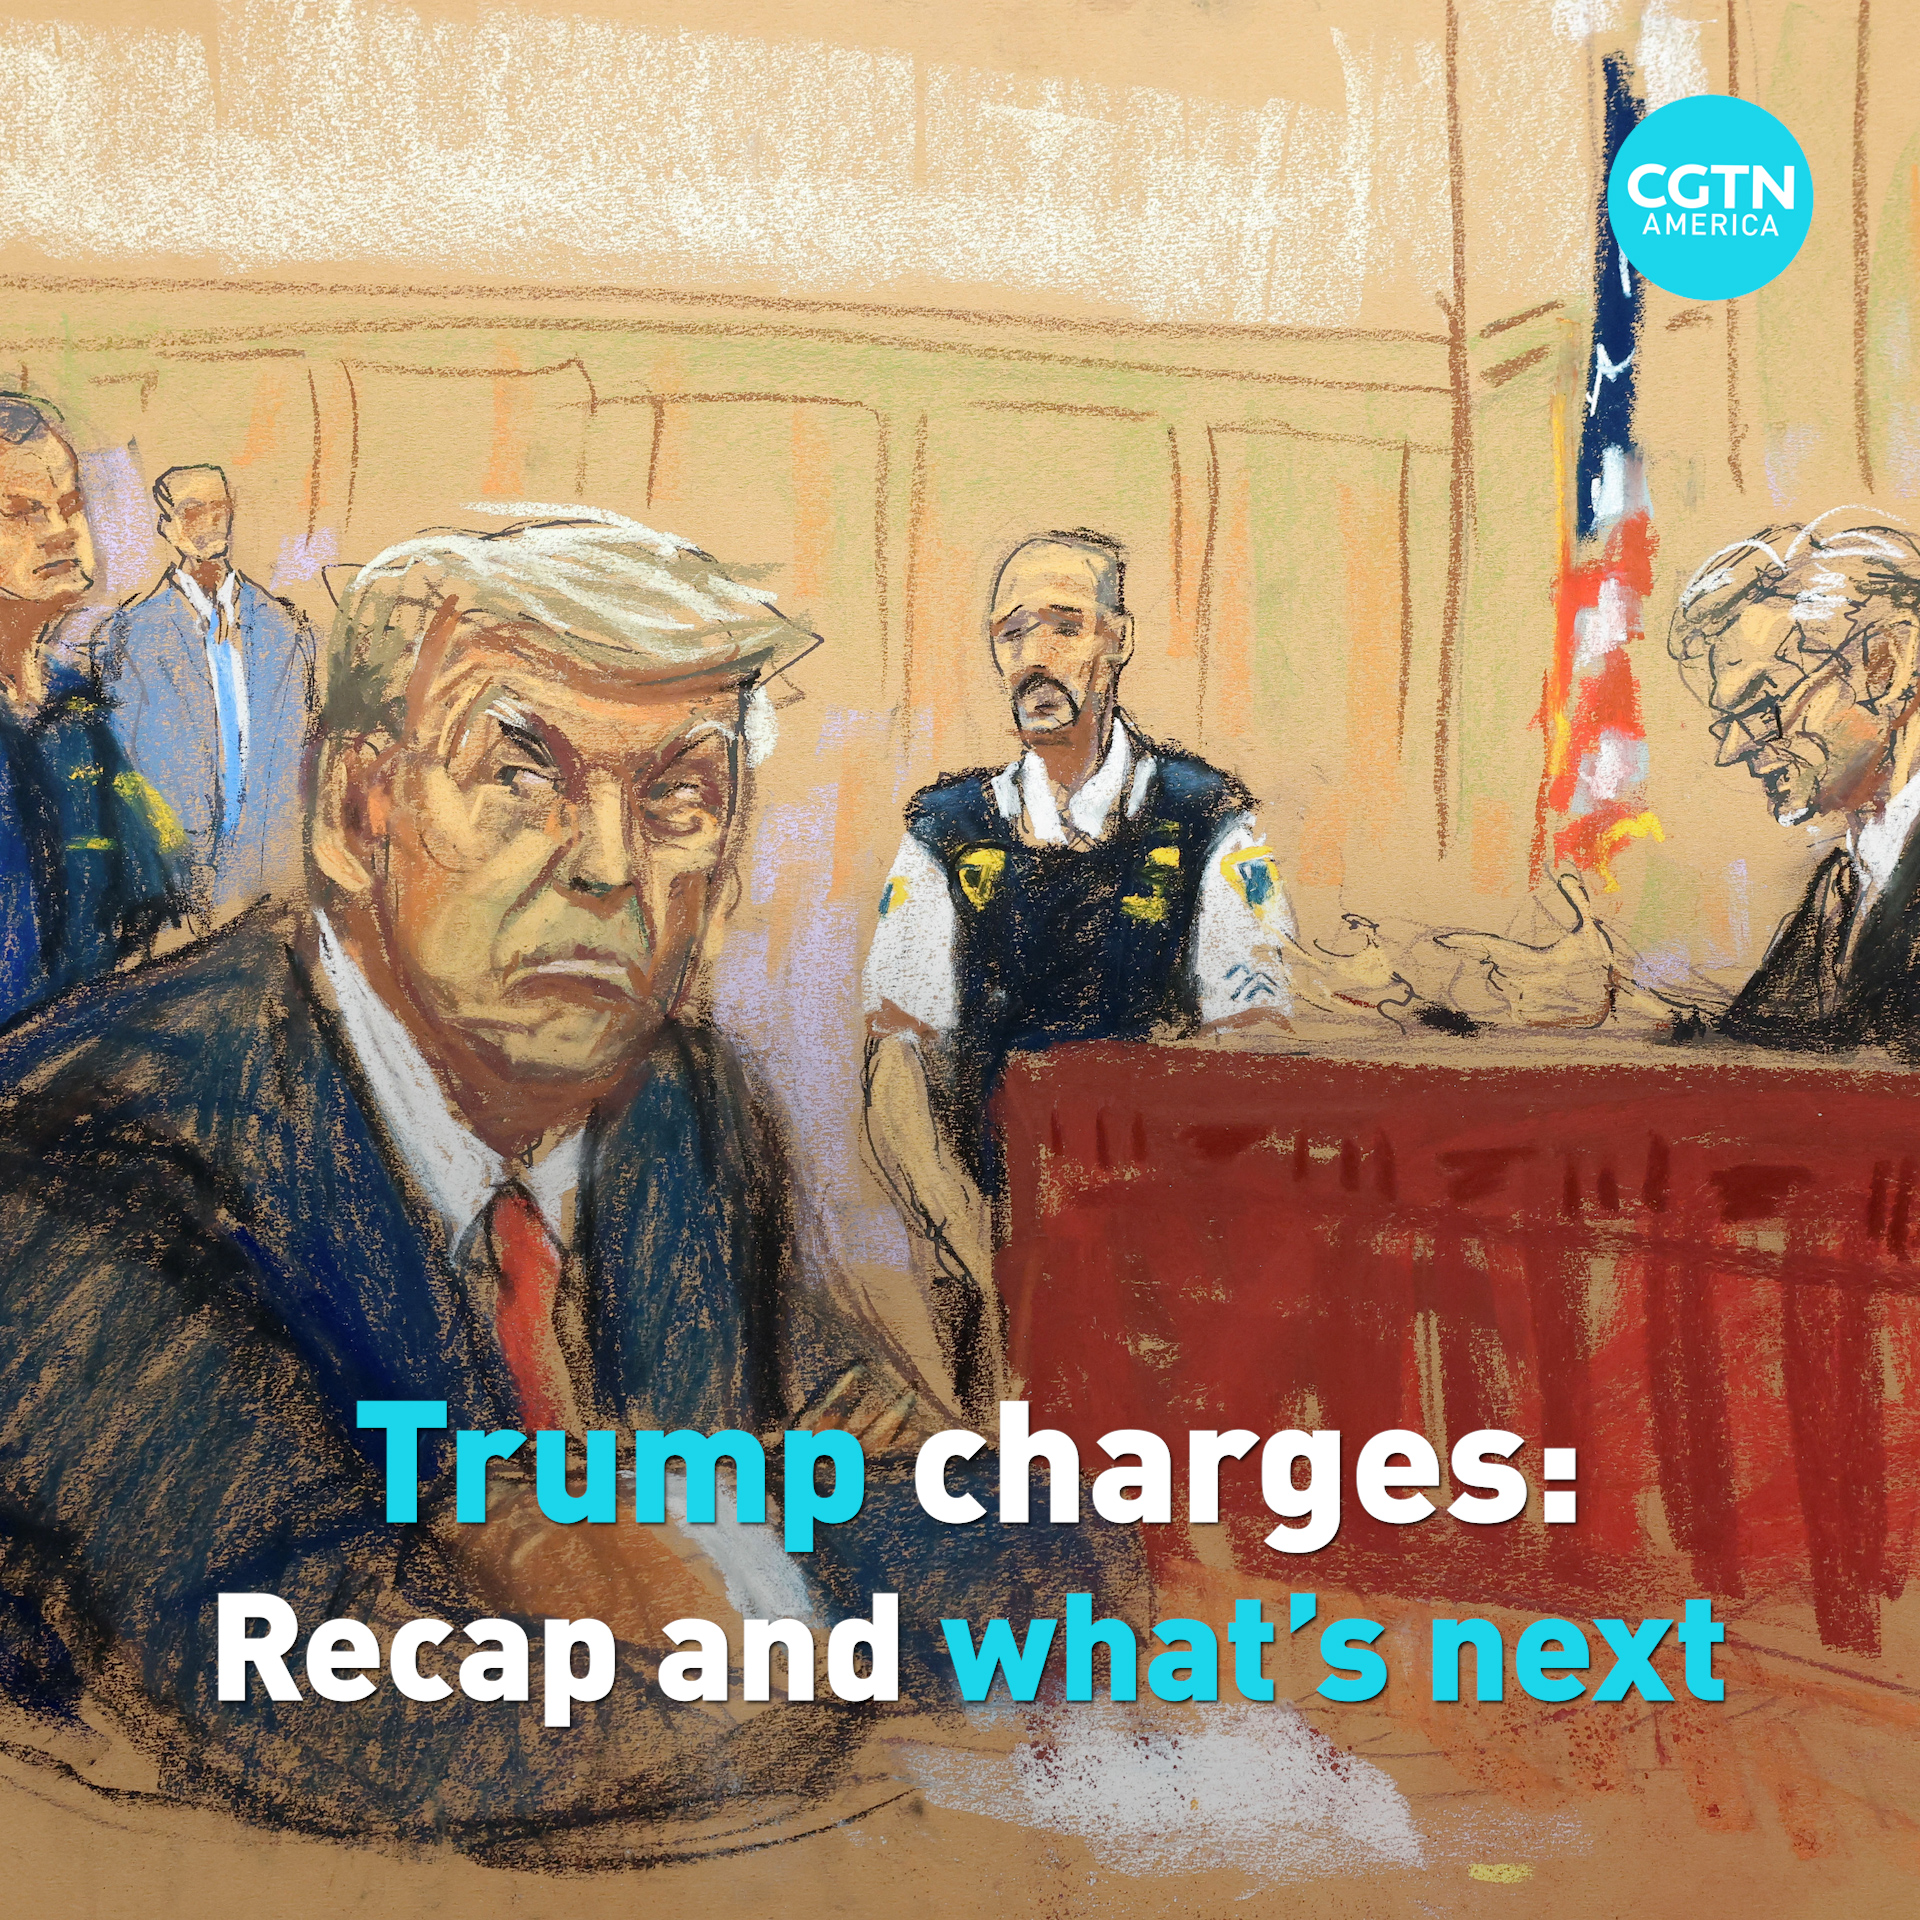 What happened with Trump's arrest and what is next?